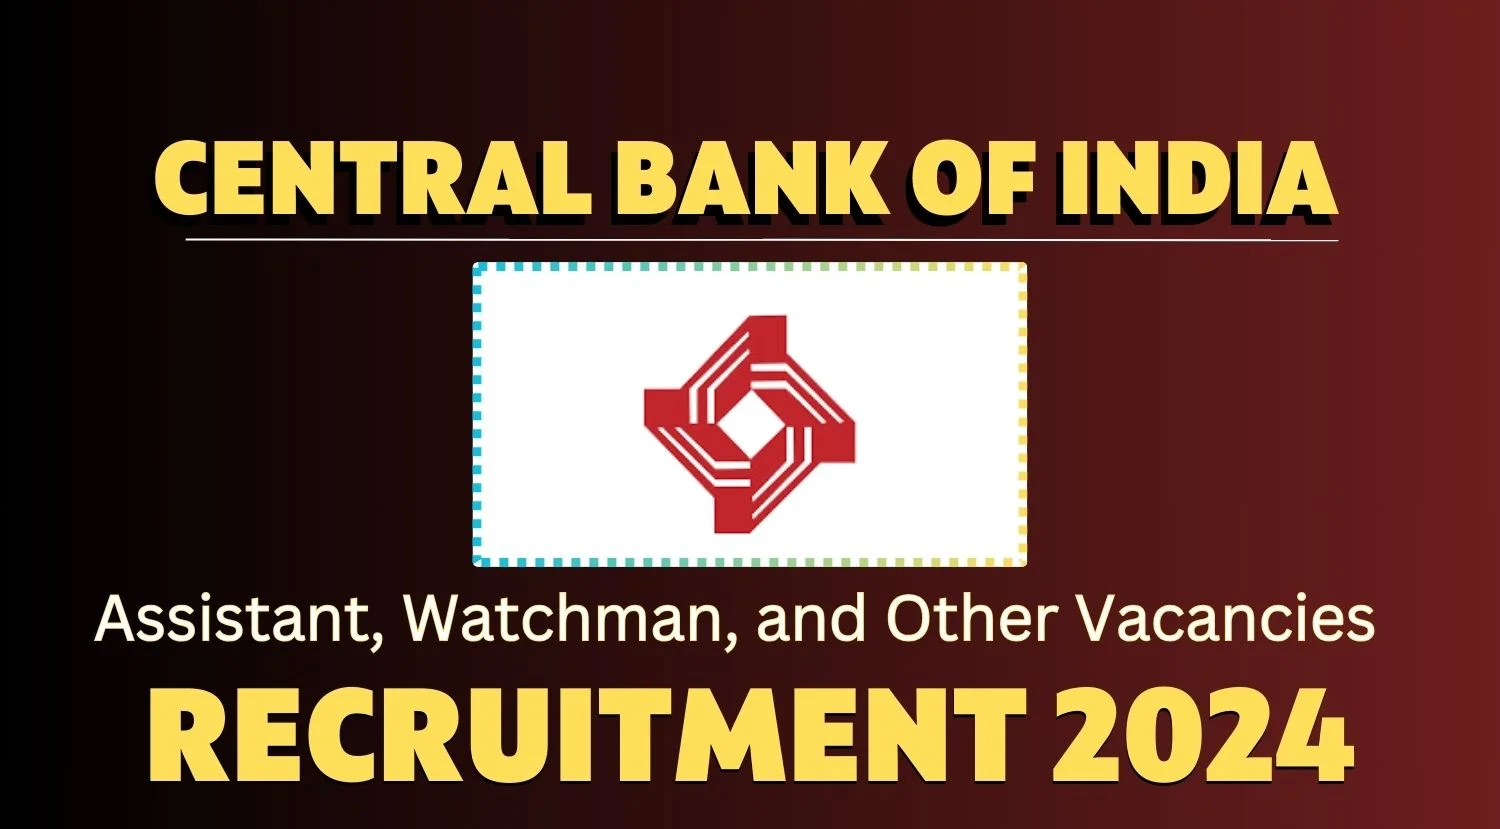 Central Bank of India Assistant Watchman and Other Vacancies Recruitment 2024